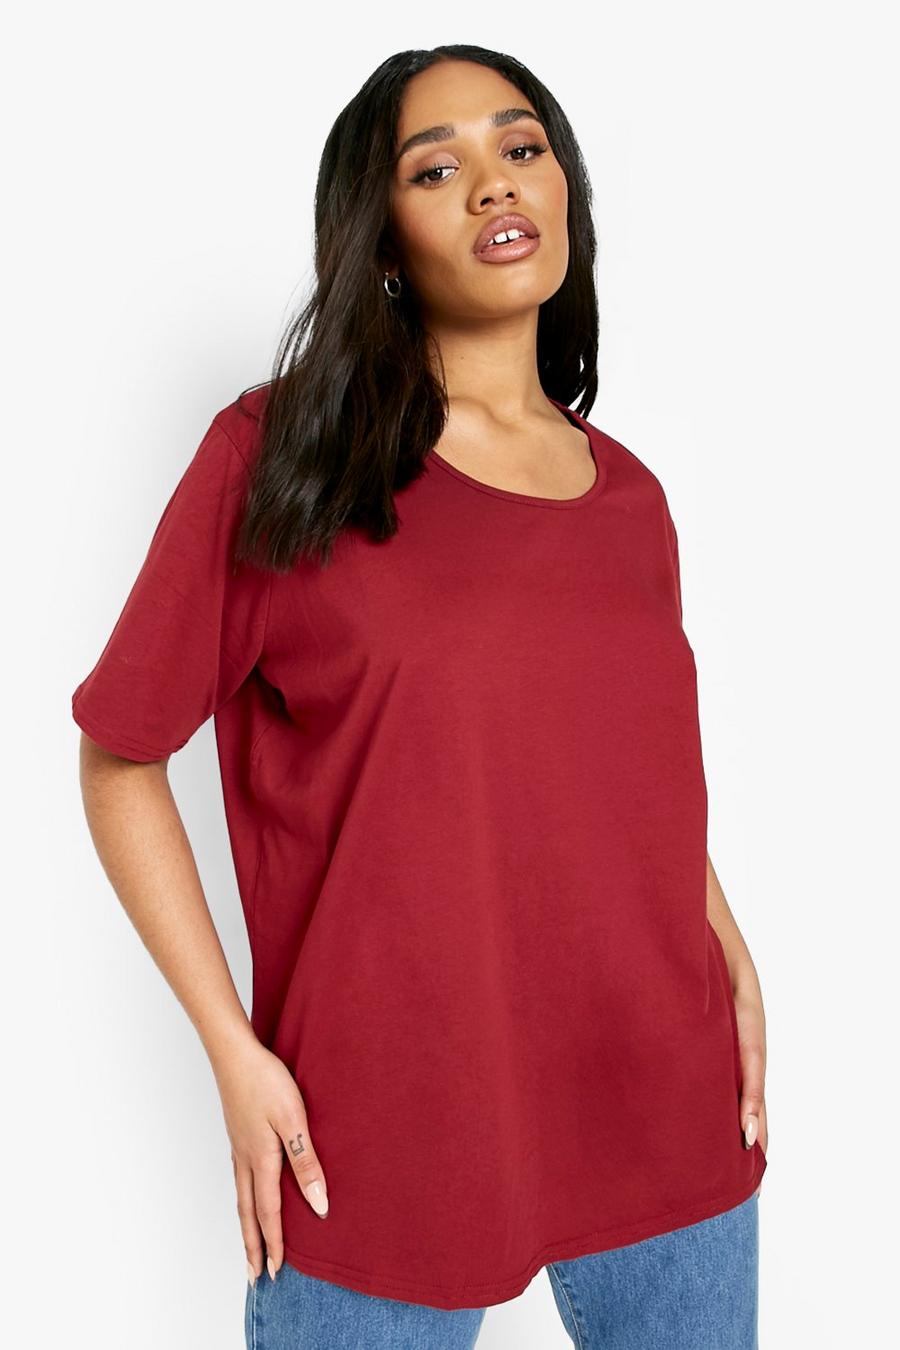 boohoo Plus Size Recycled Oversized T-Shirt - Red - Size 12